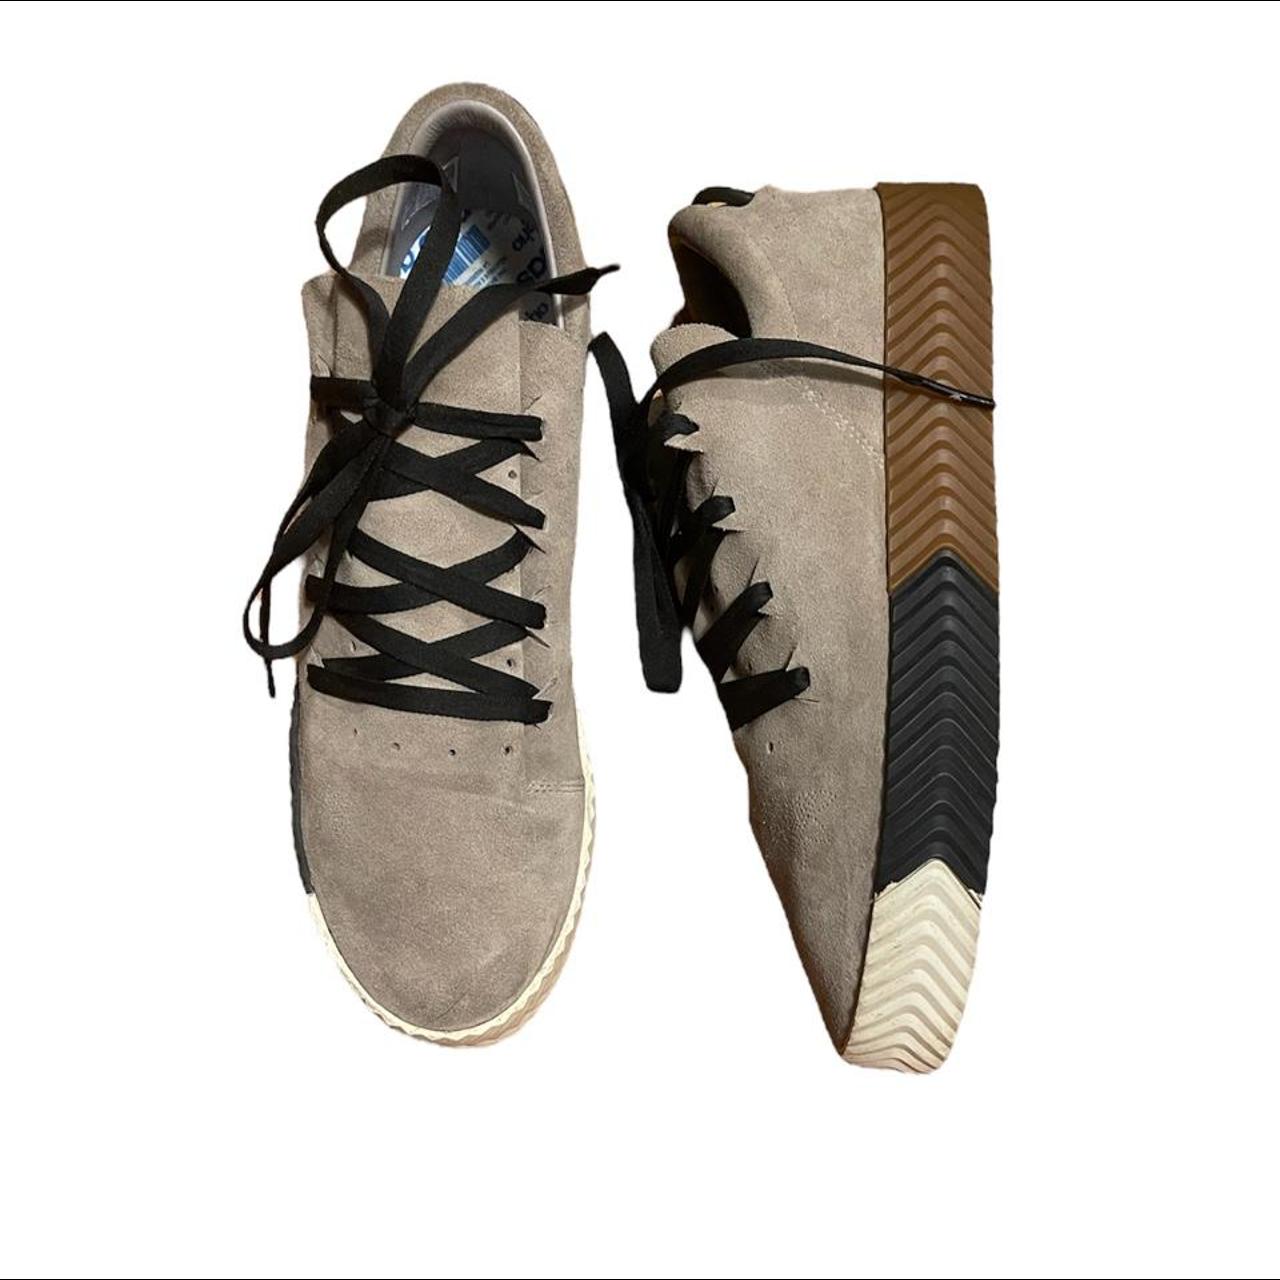 Alexander Wang Men's Black and Grey Trainers